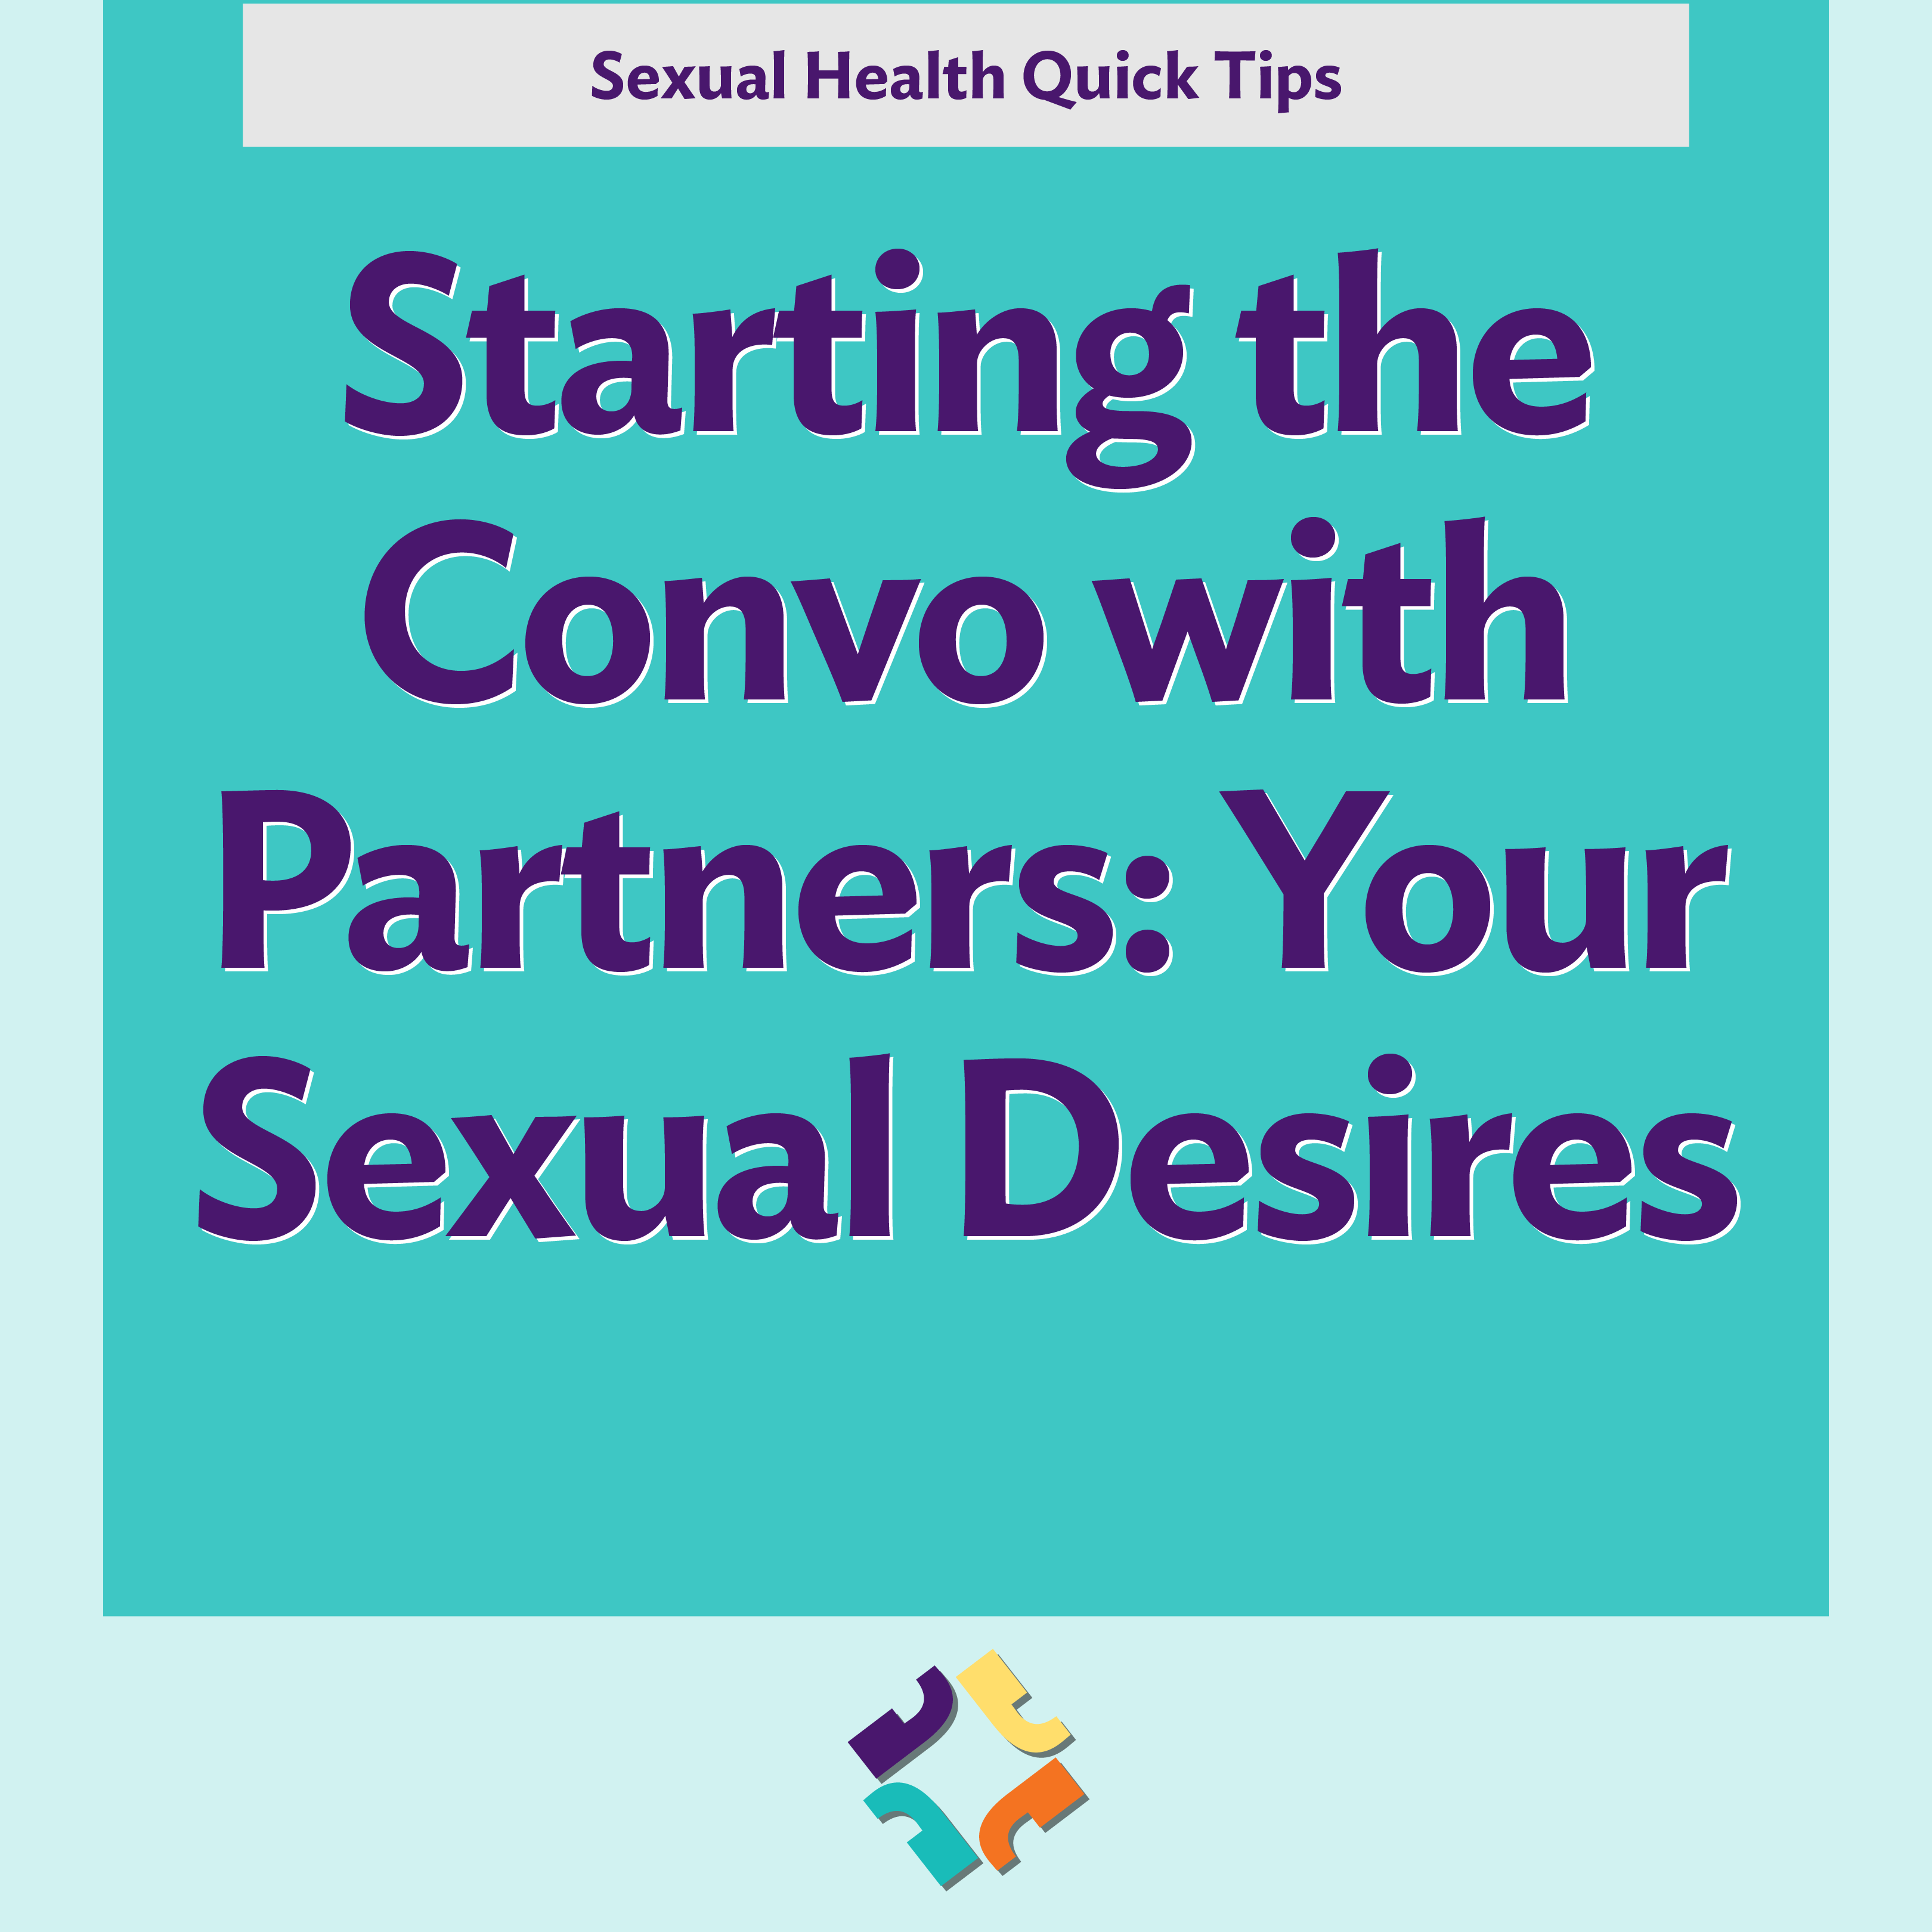 Sexual Health Quick Tips